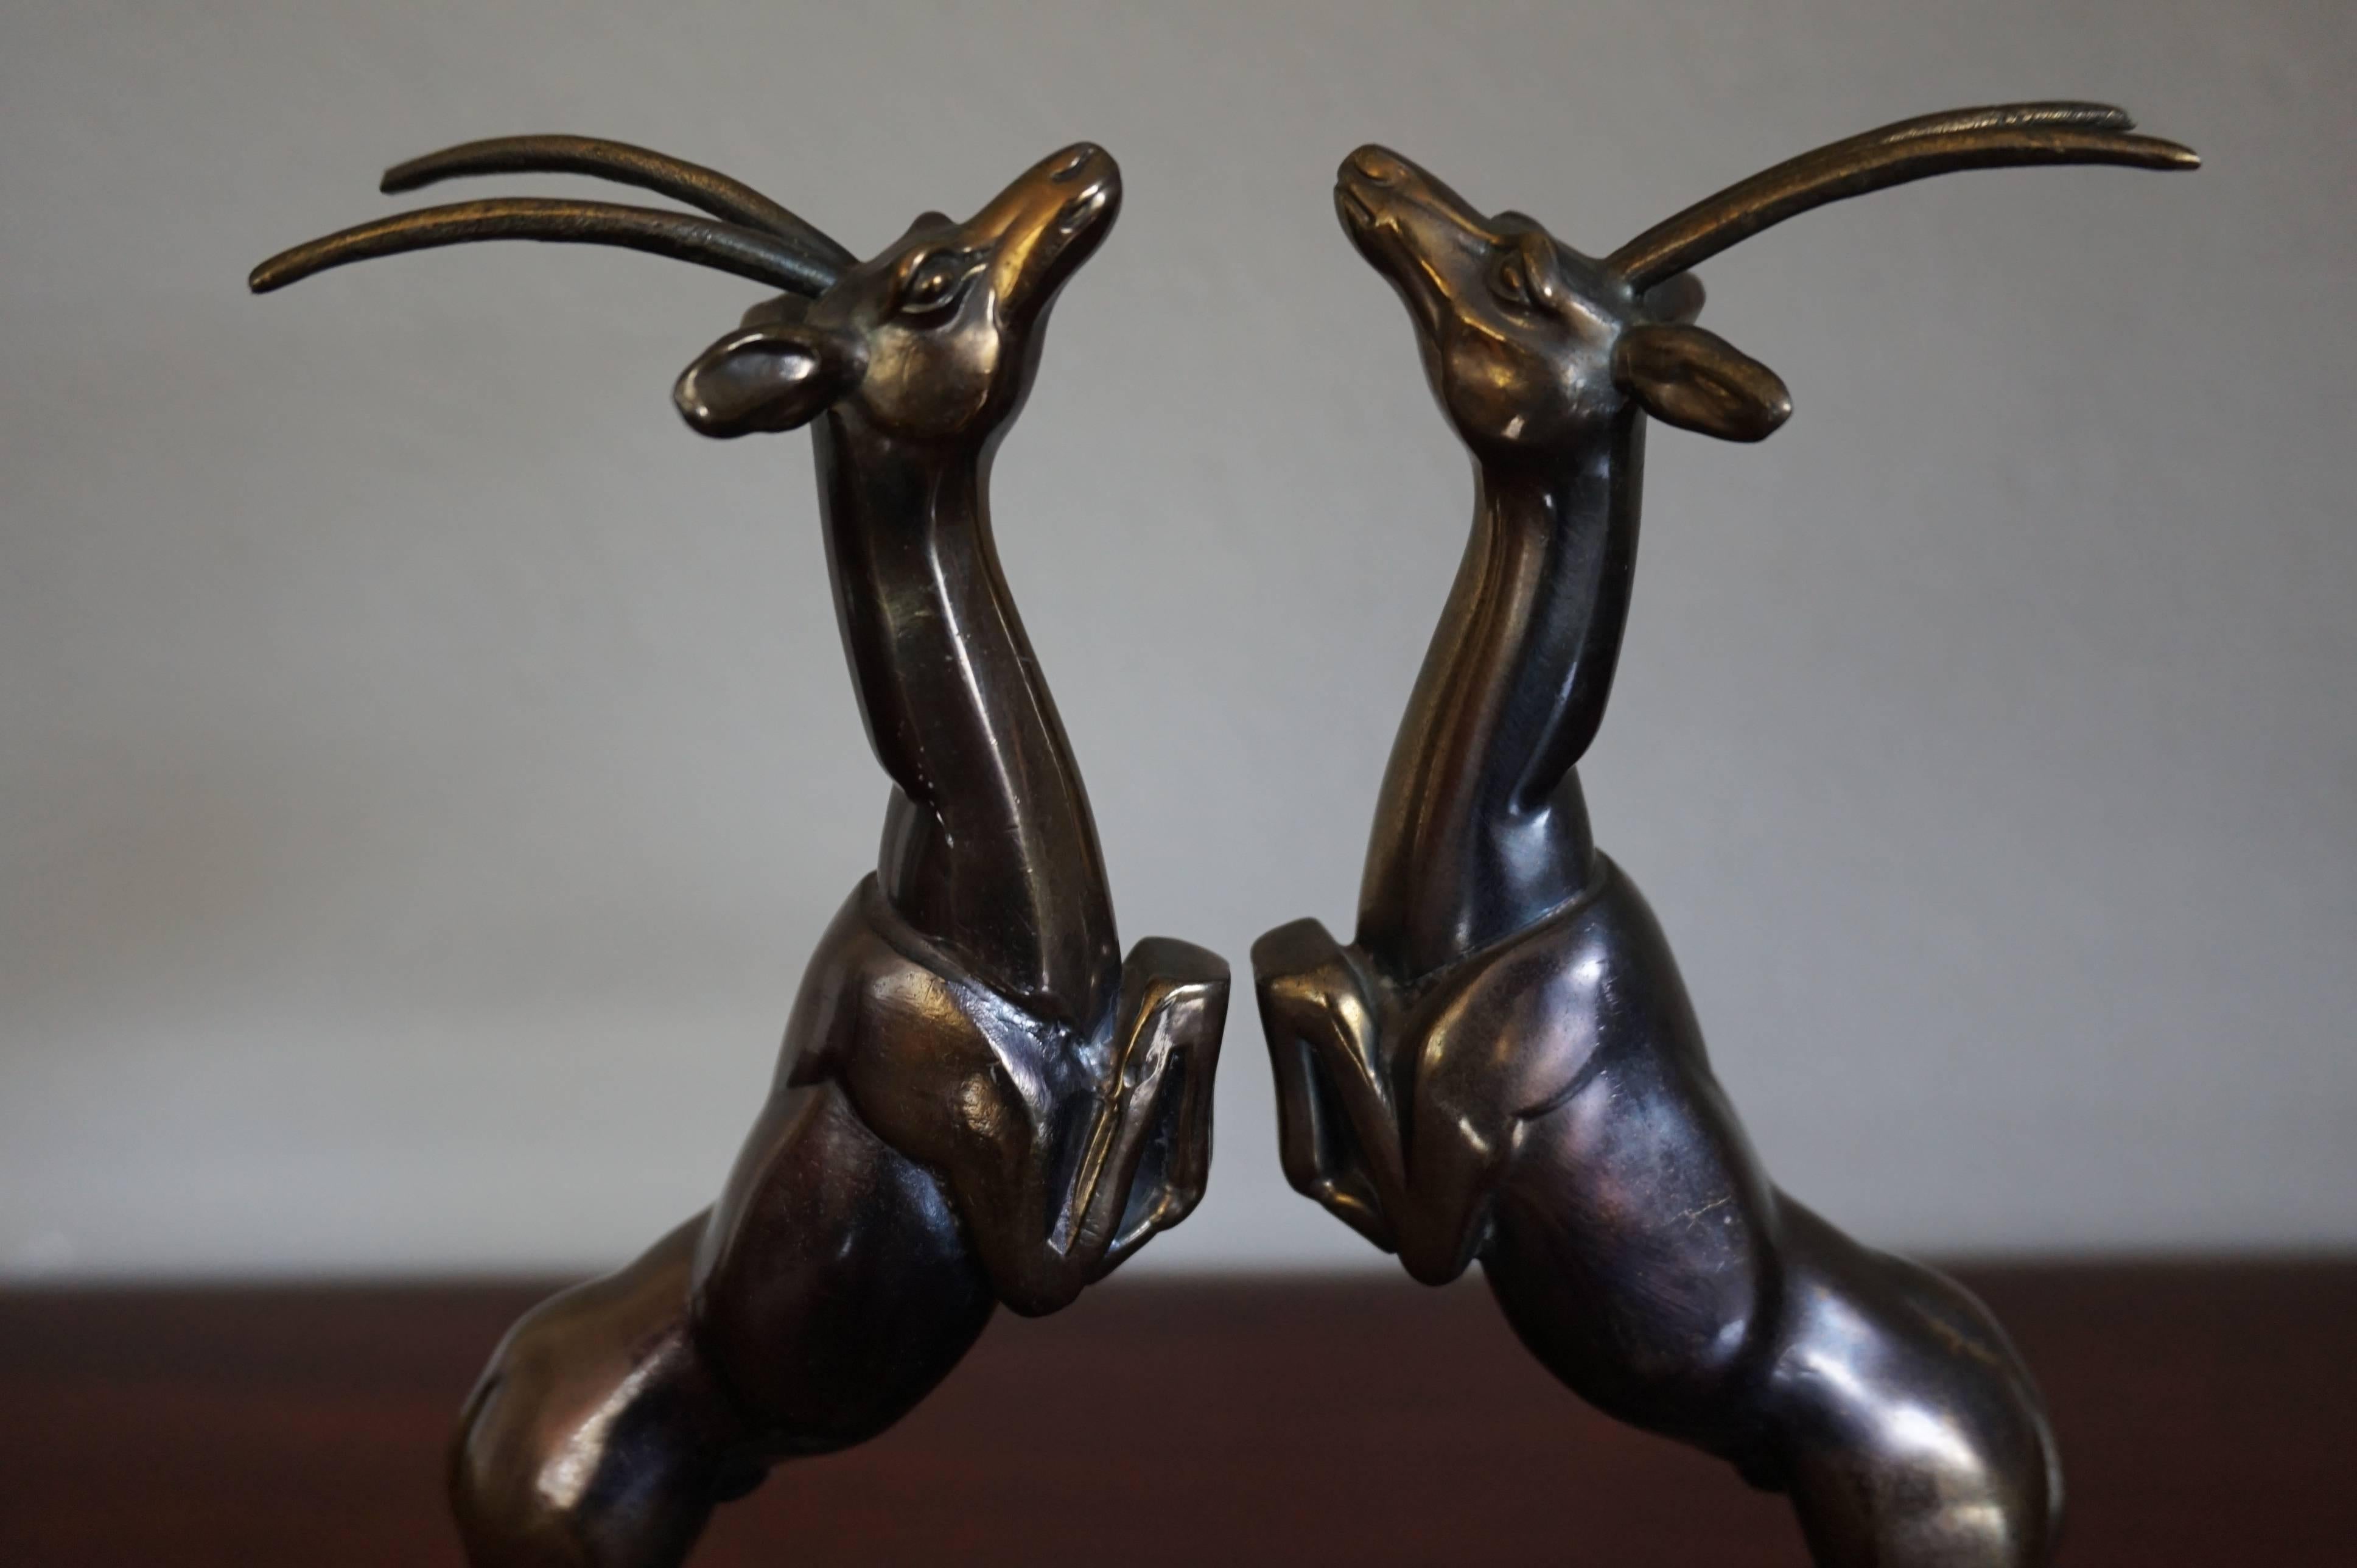 Pair of Art Deco Bookends with Brass Jumping Deer Sculptures on Marble Base For Sale 2